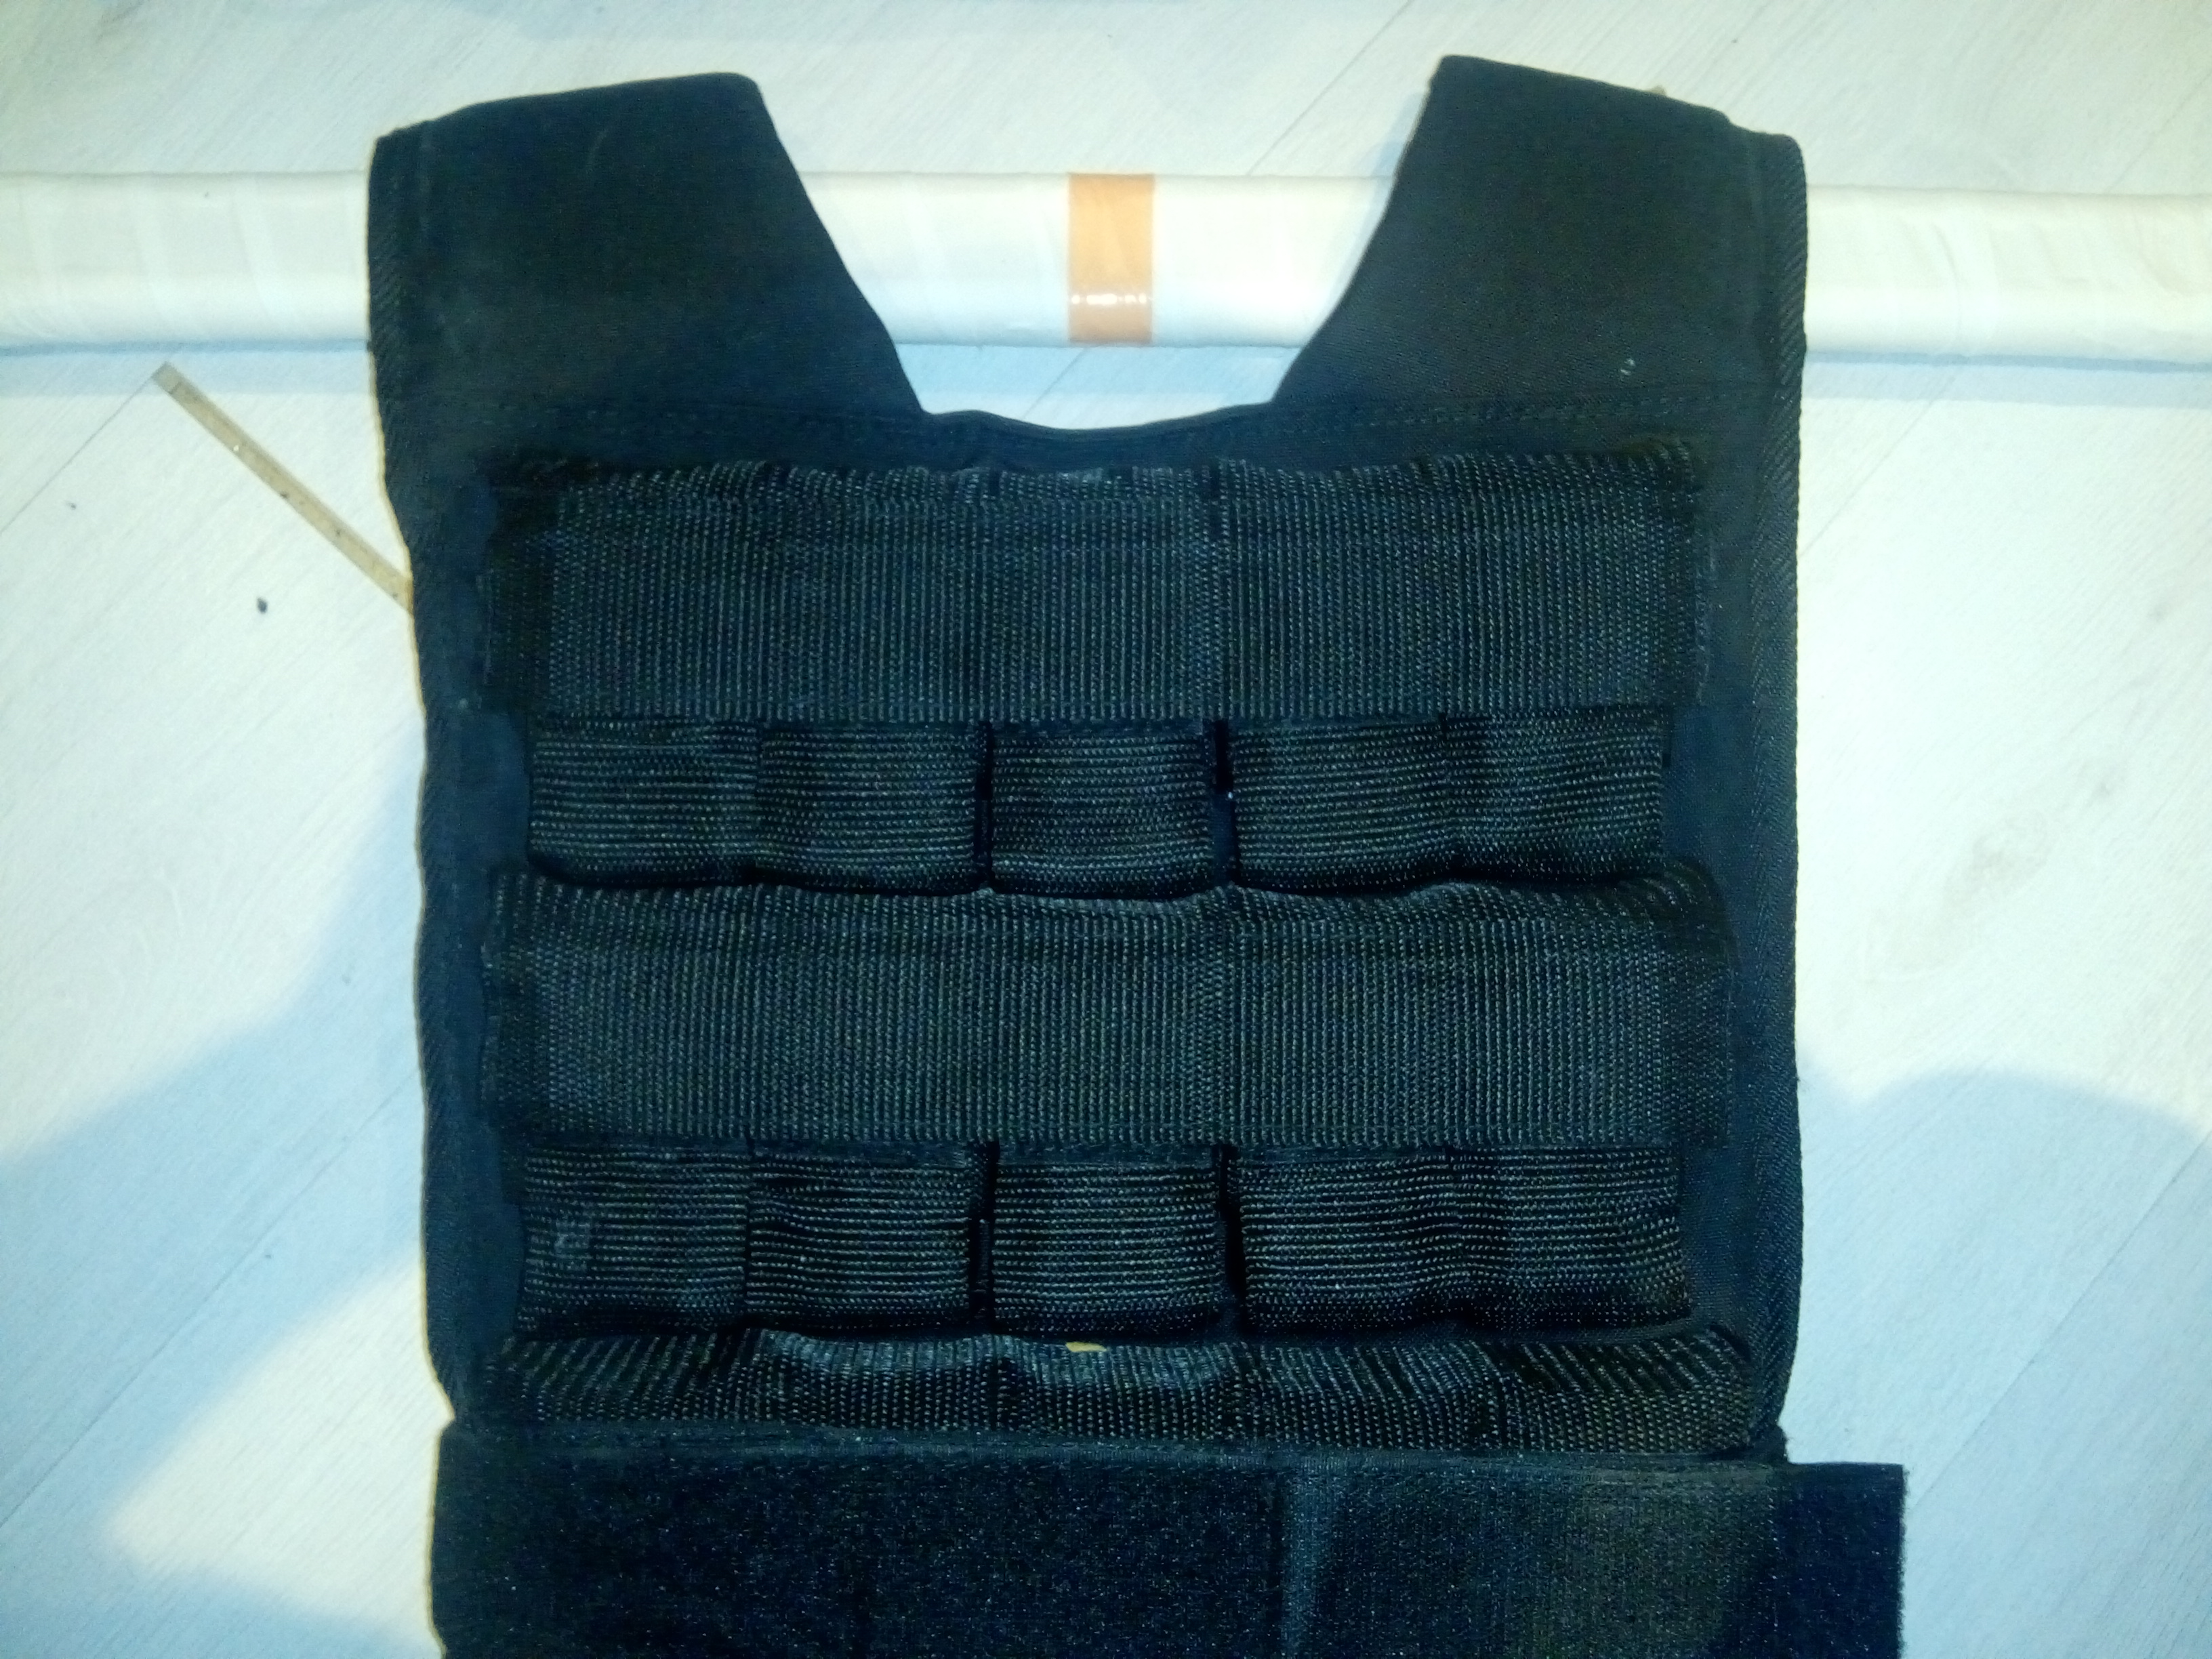 Lifting bar thread through the weighted vest